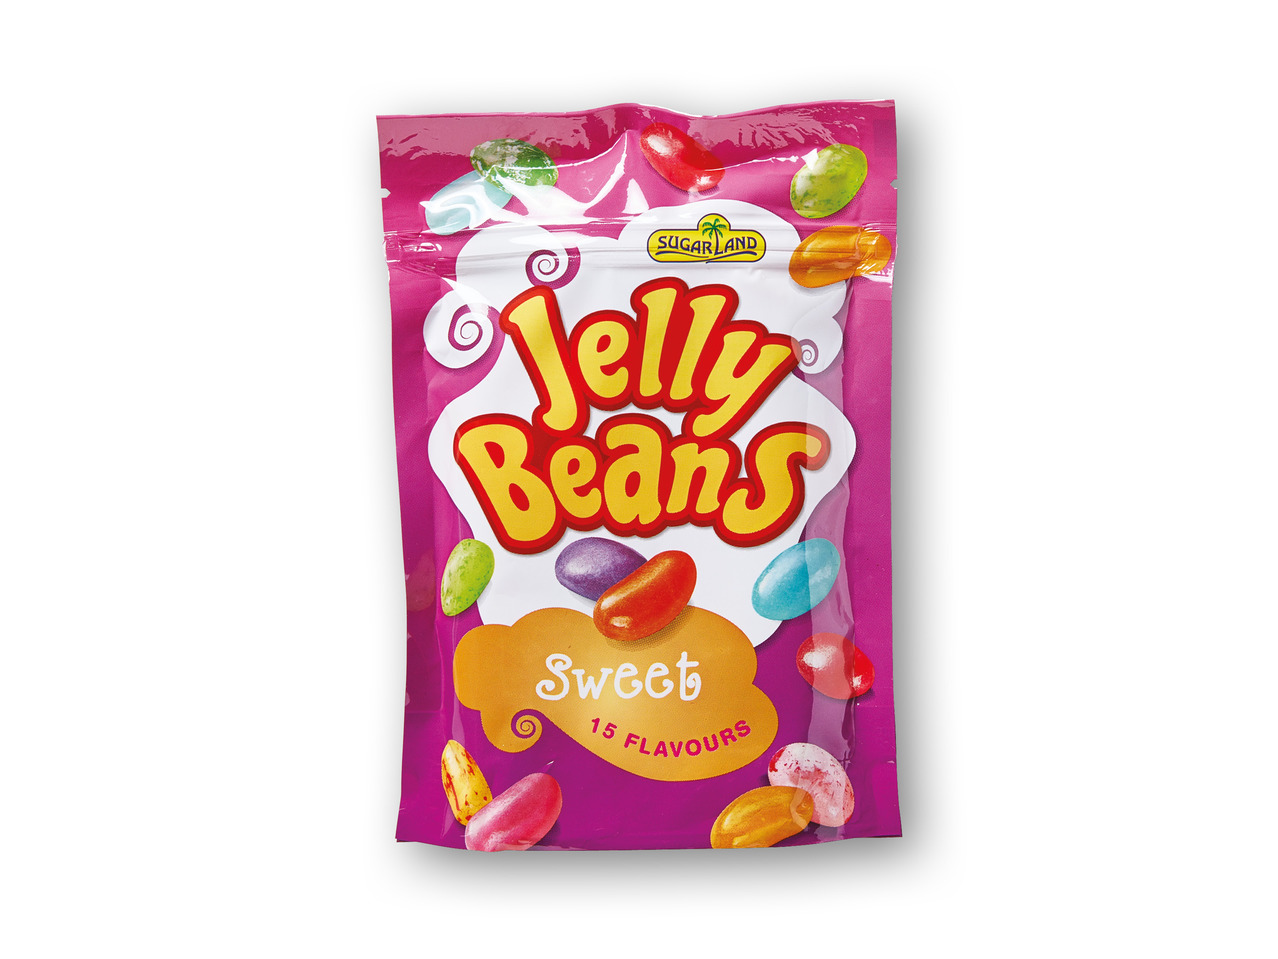 SUGARLAND Jelly beans